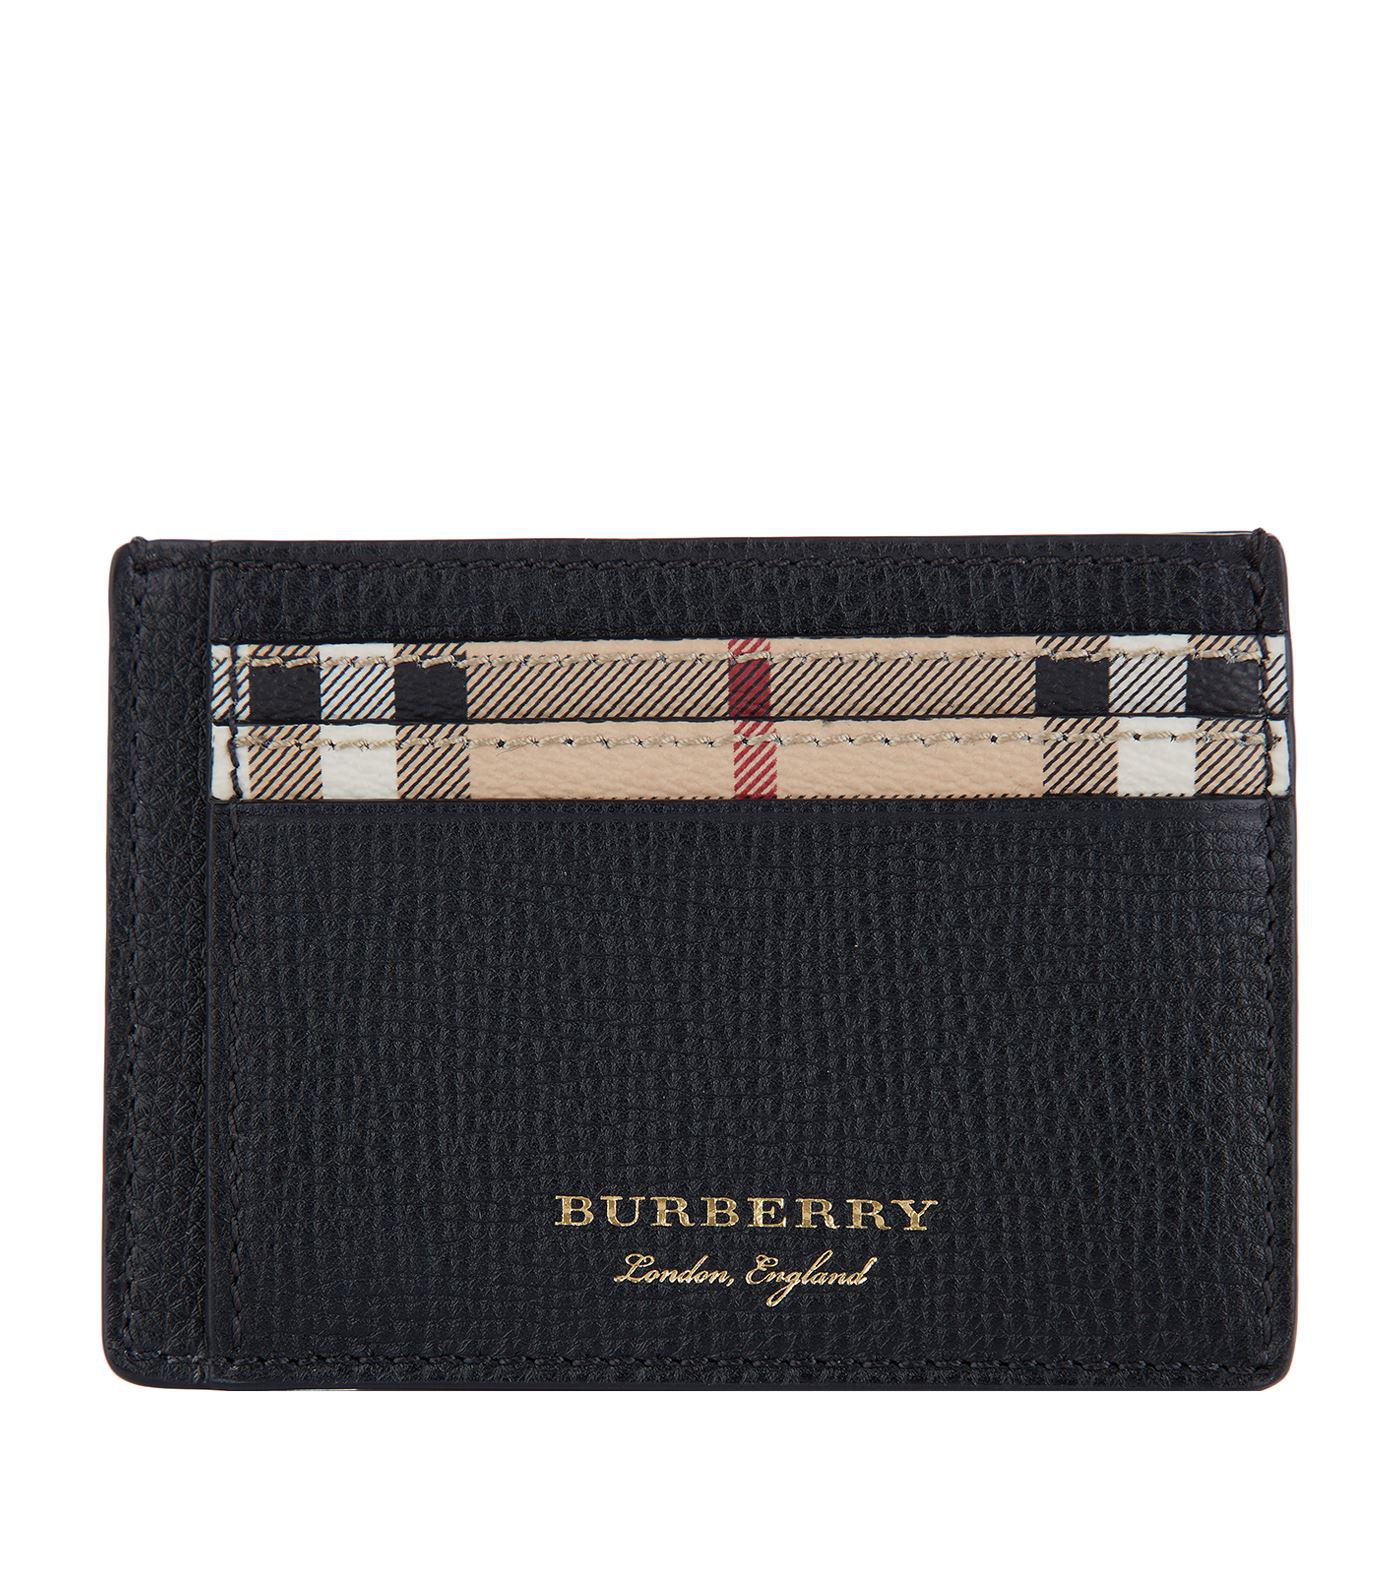 Burberry Haymarket Check And Leather Card Case in Black for Men - Lyst